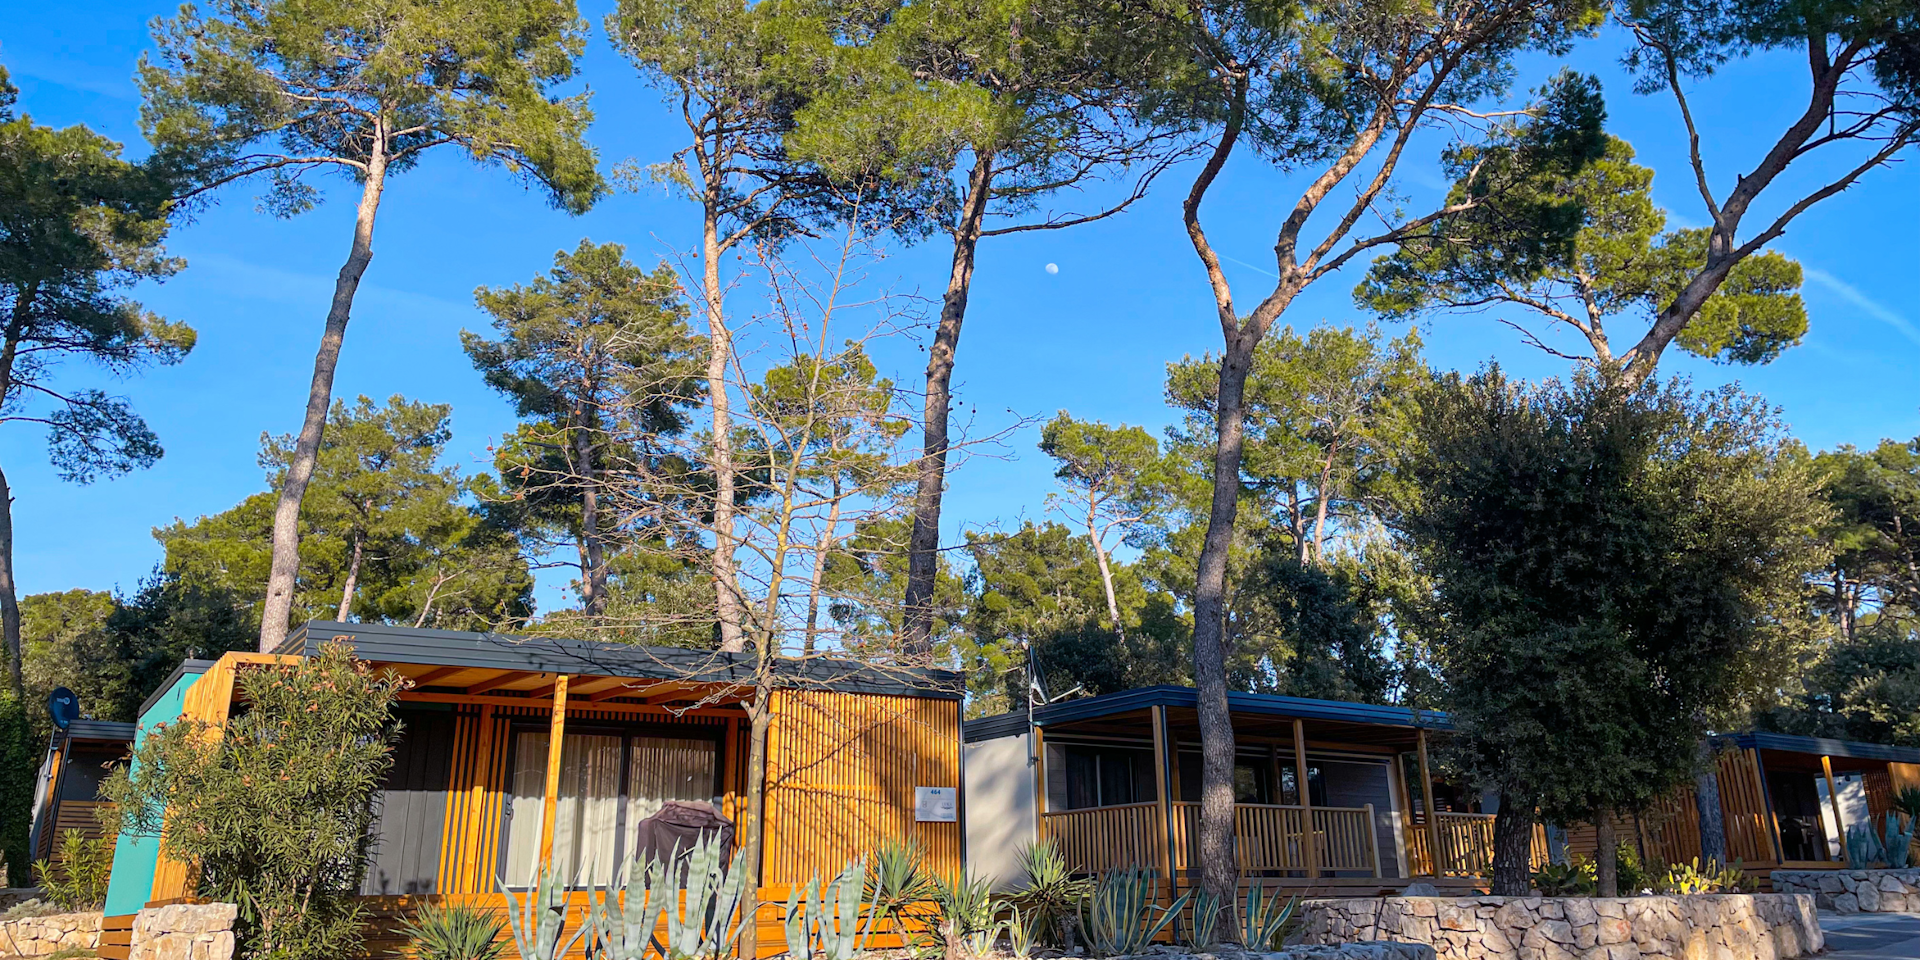 OFFERTA SPECIALE HOLIDAY HOMES